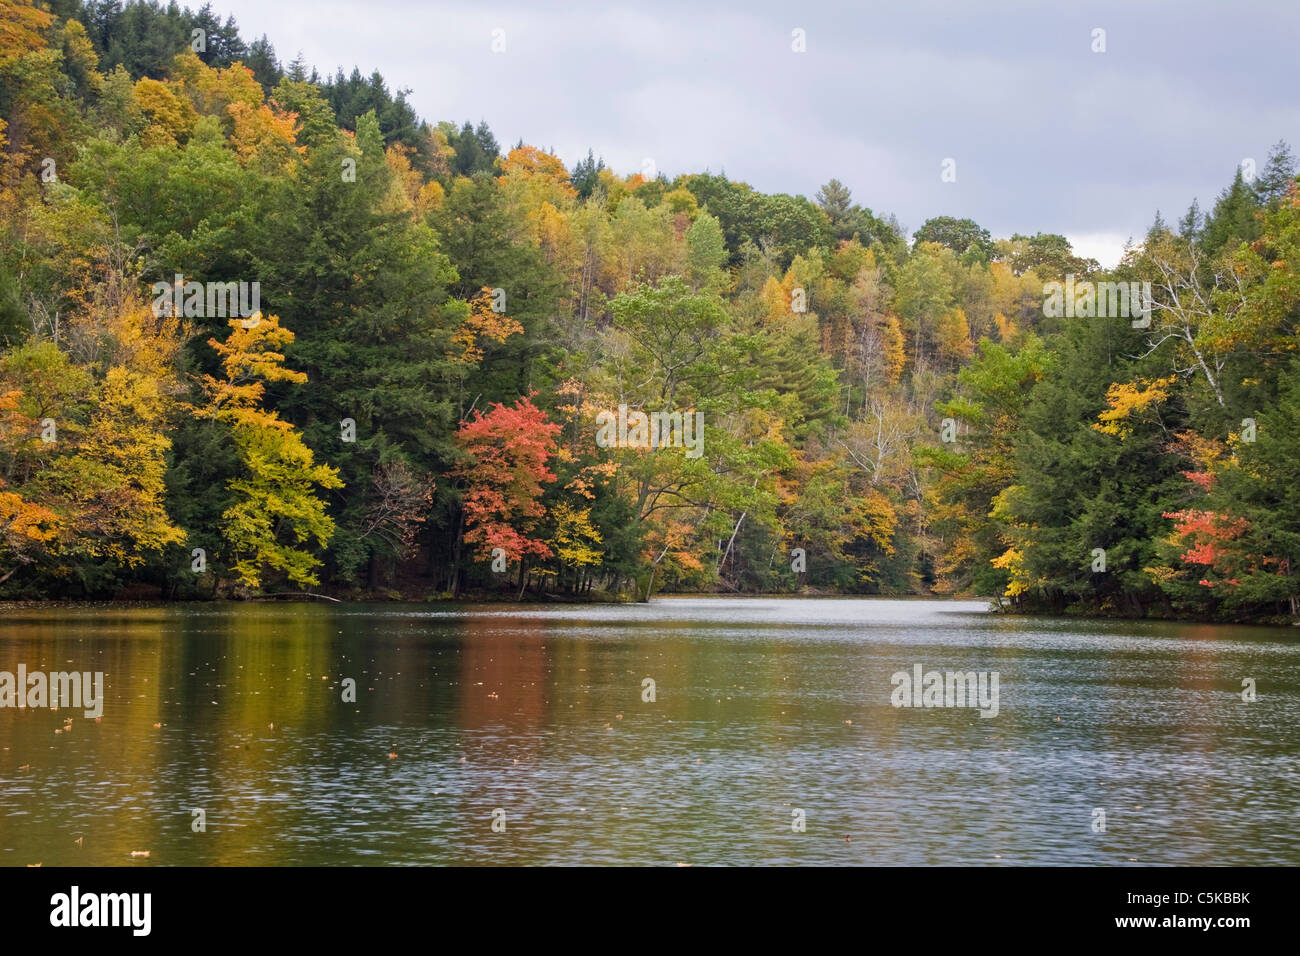 Emerald lake surrounded by mountainsides of trees in Fall color. Stock Photo